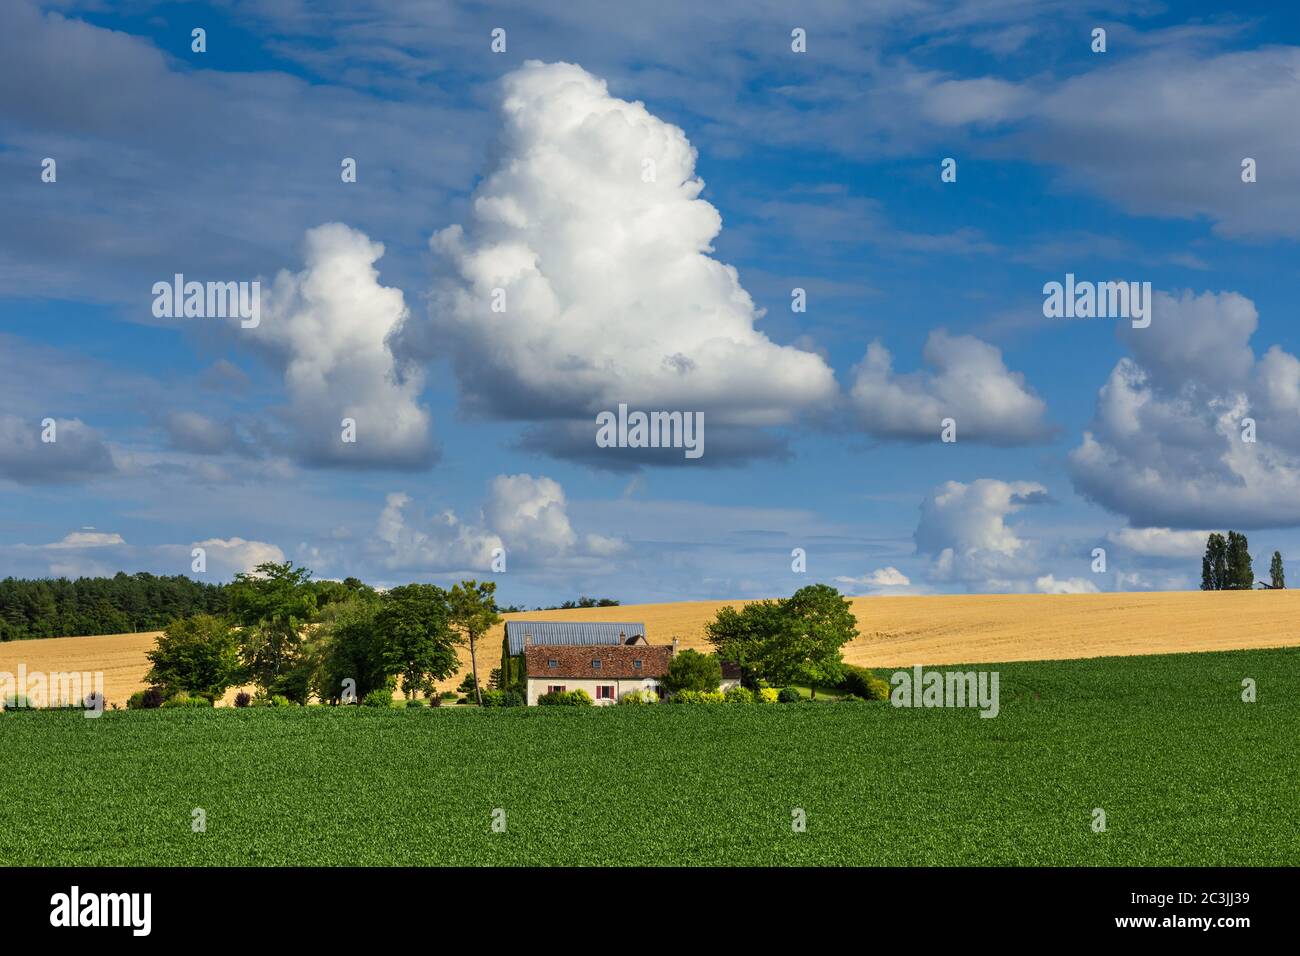 Typical French Touraine landscape and farmland - Boussay, Indre-et-Loire, France. Stock Photo